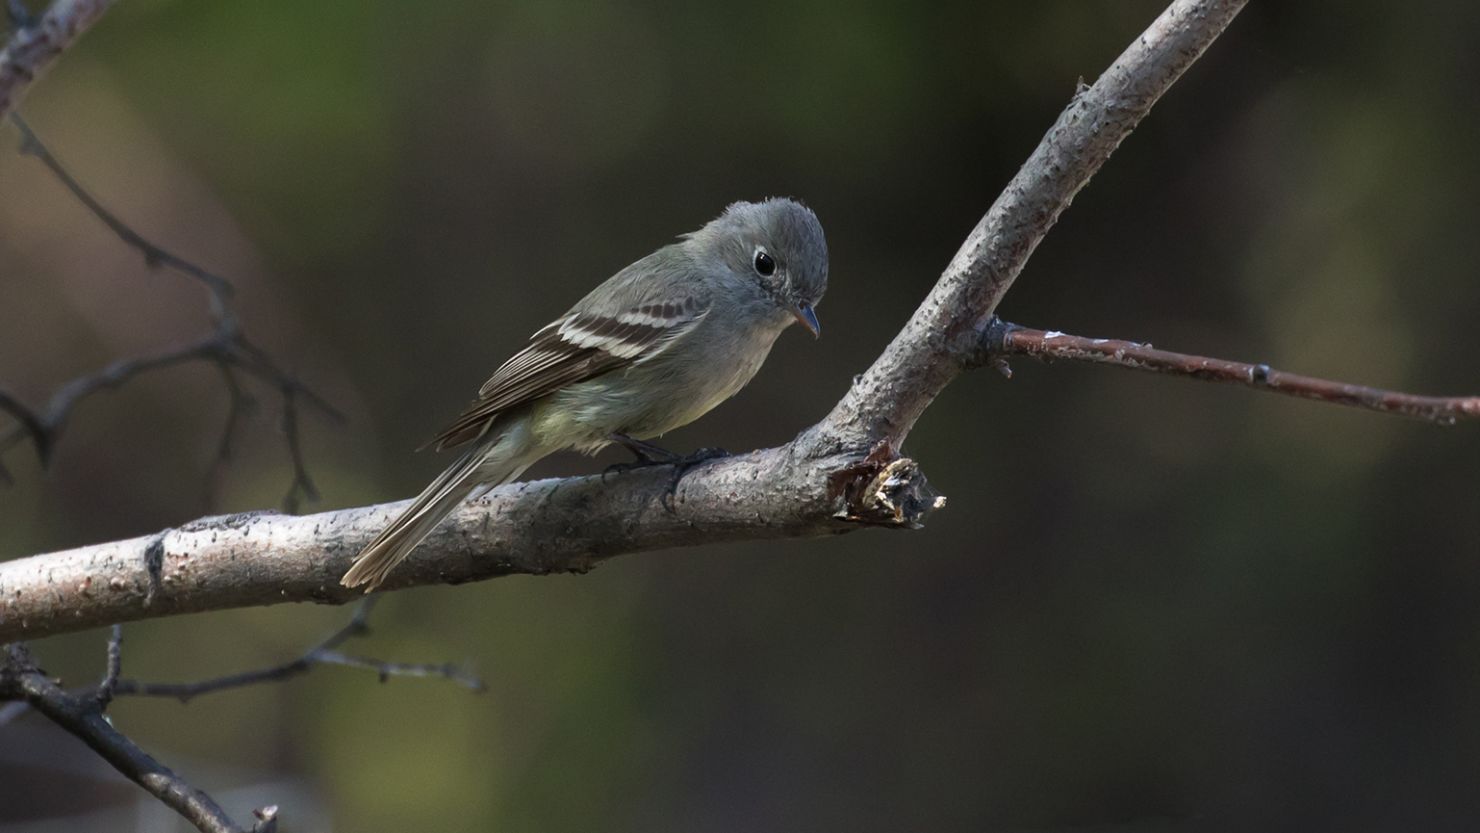 Hammond's flycatcher, which is named after a former US surgeon general who Bird Names for Birds said was racist. 